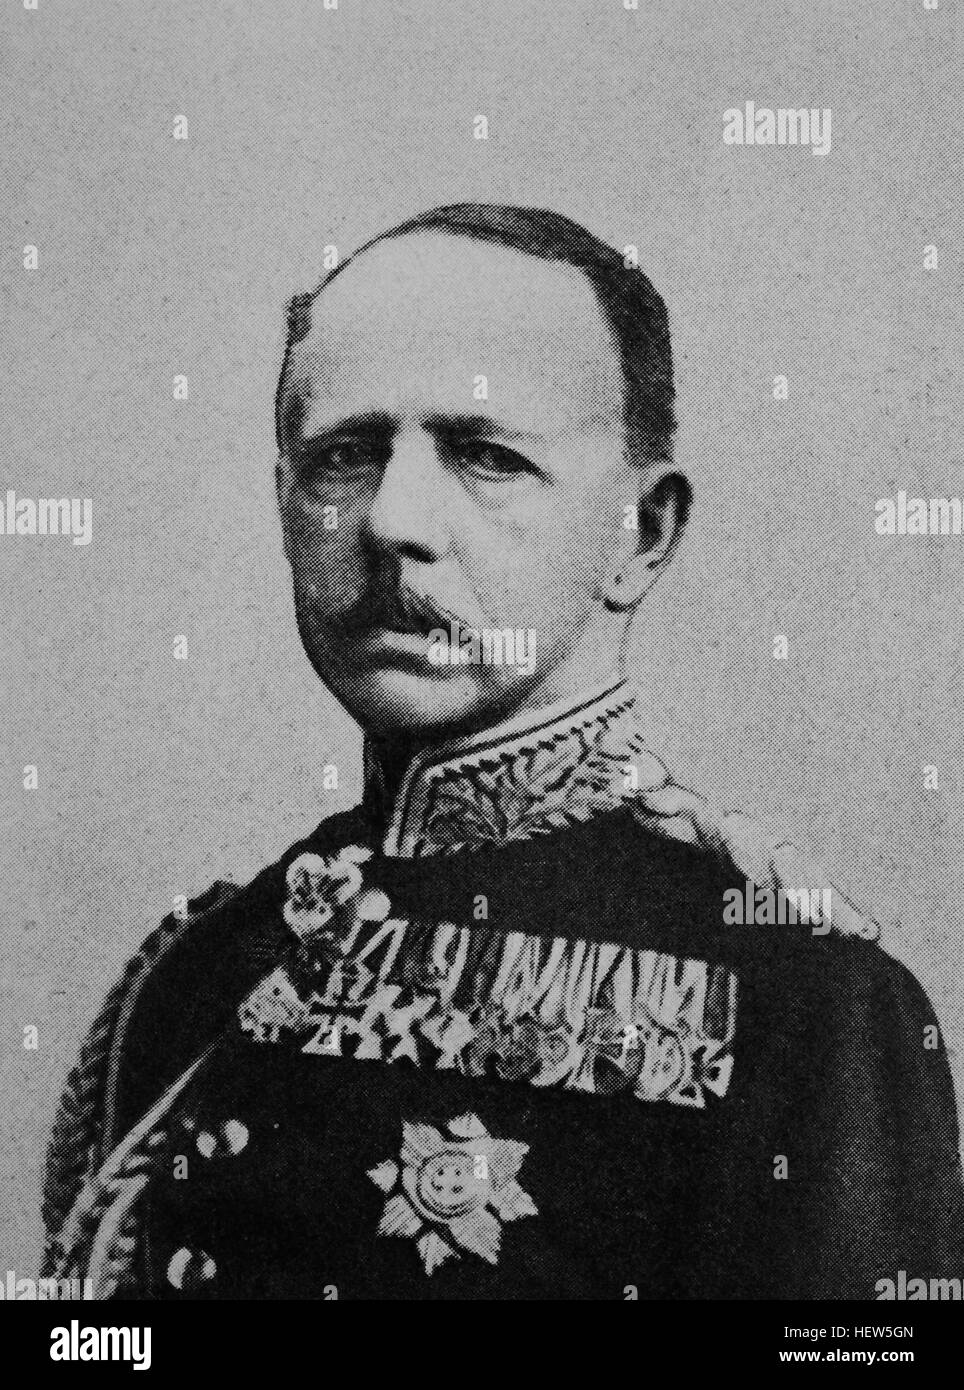 Karl Alexander August Johann, Grand Duke of Saxe-Weimar-Eisenach, 24 June 1818 - 5 January 1901, ruler of Saxe-Weimar-Eisenach from 1853 until his death., picture from 1895, digital improved Stock Photo